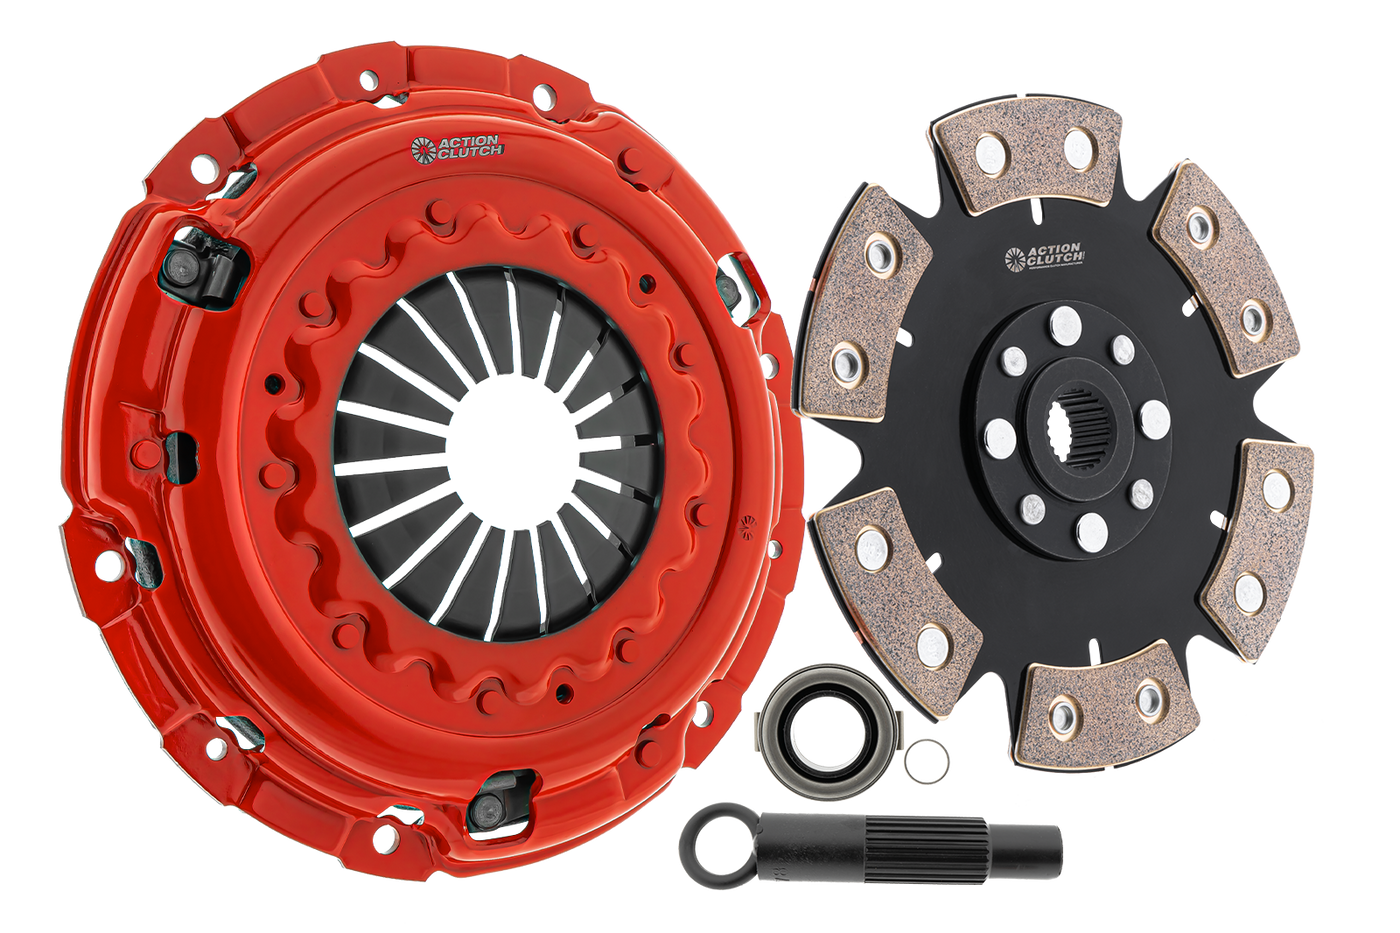 Stage 4 Clutch Kit (1MD) for Mazda RX-7 1983-1988 1.3L (13B) Non-Turbo